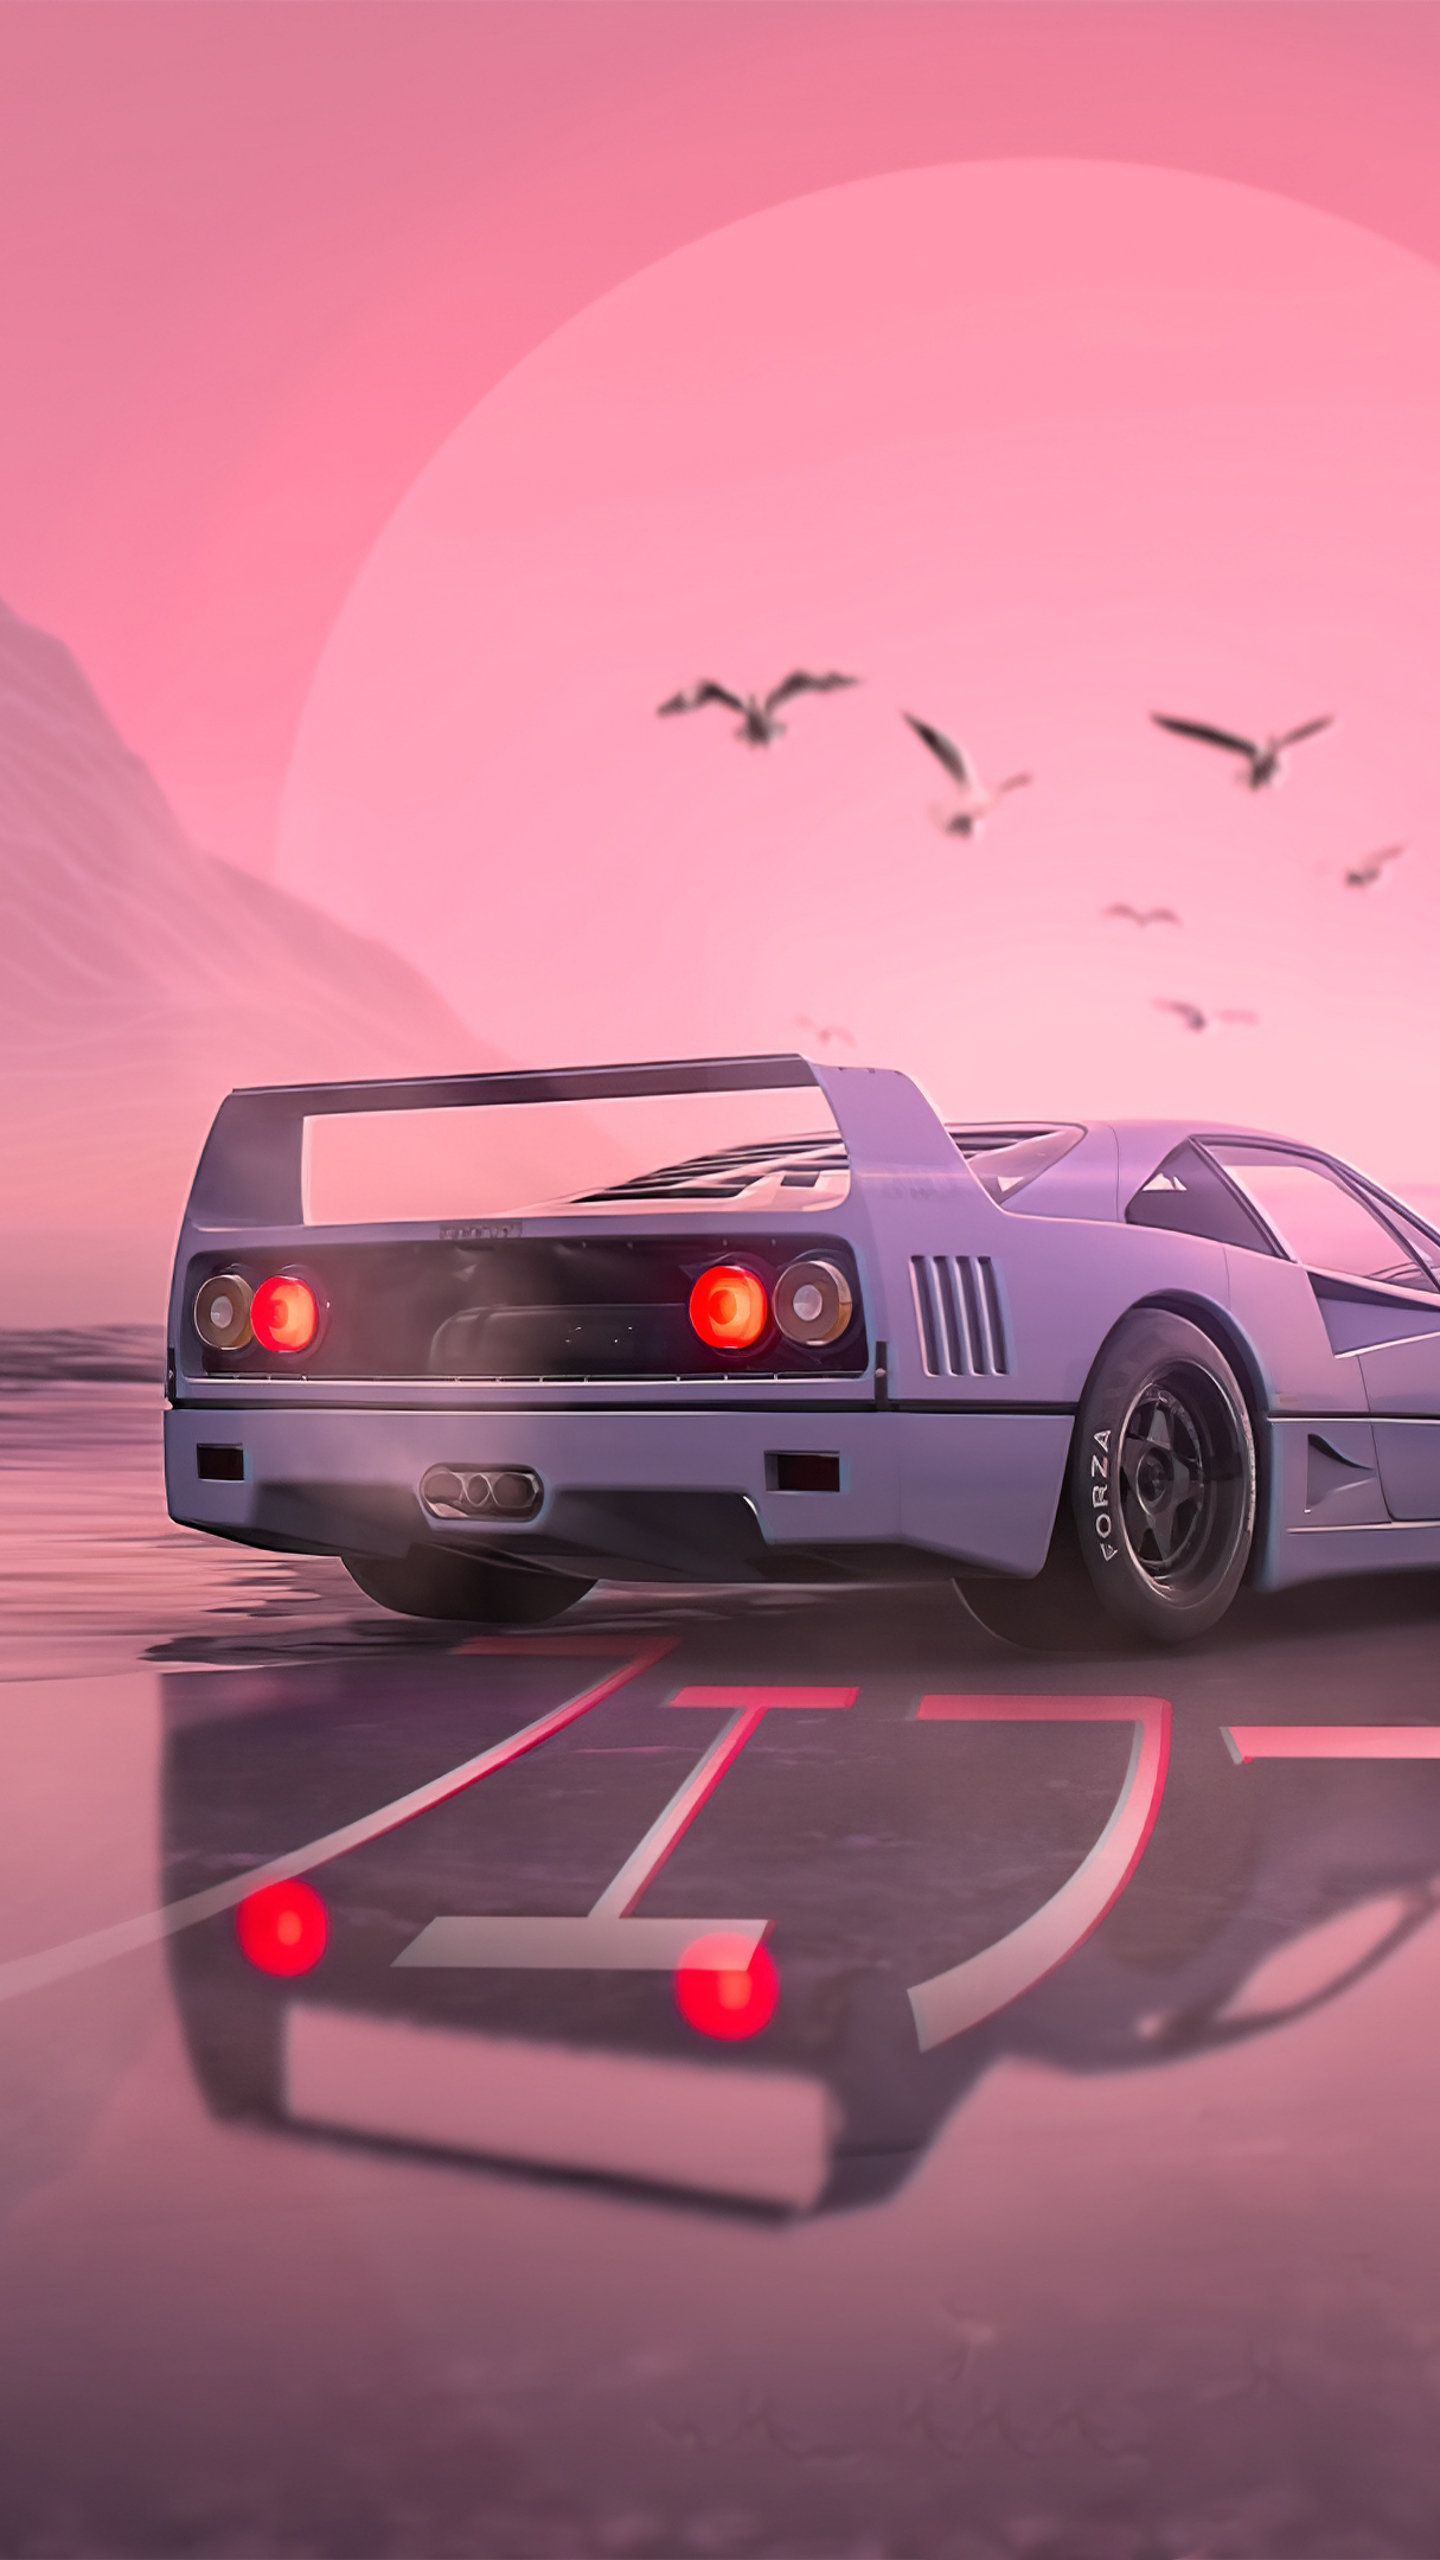 Retrowave Car 4K, HD Cars Wallpaper Photo and Picture. Car